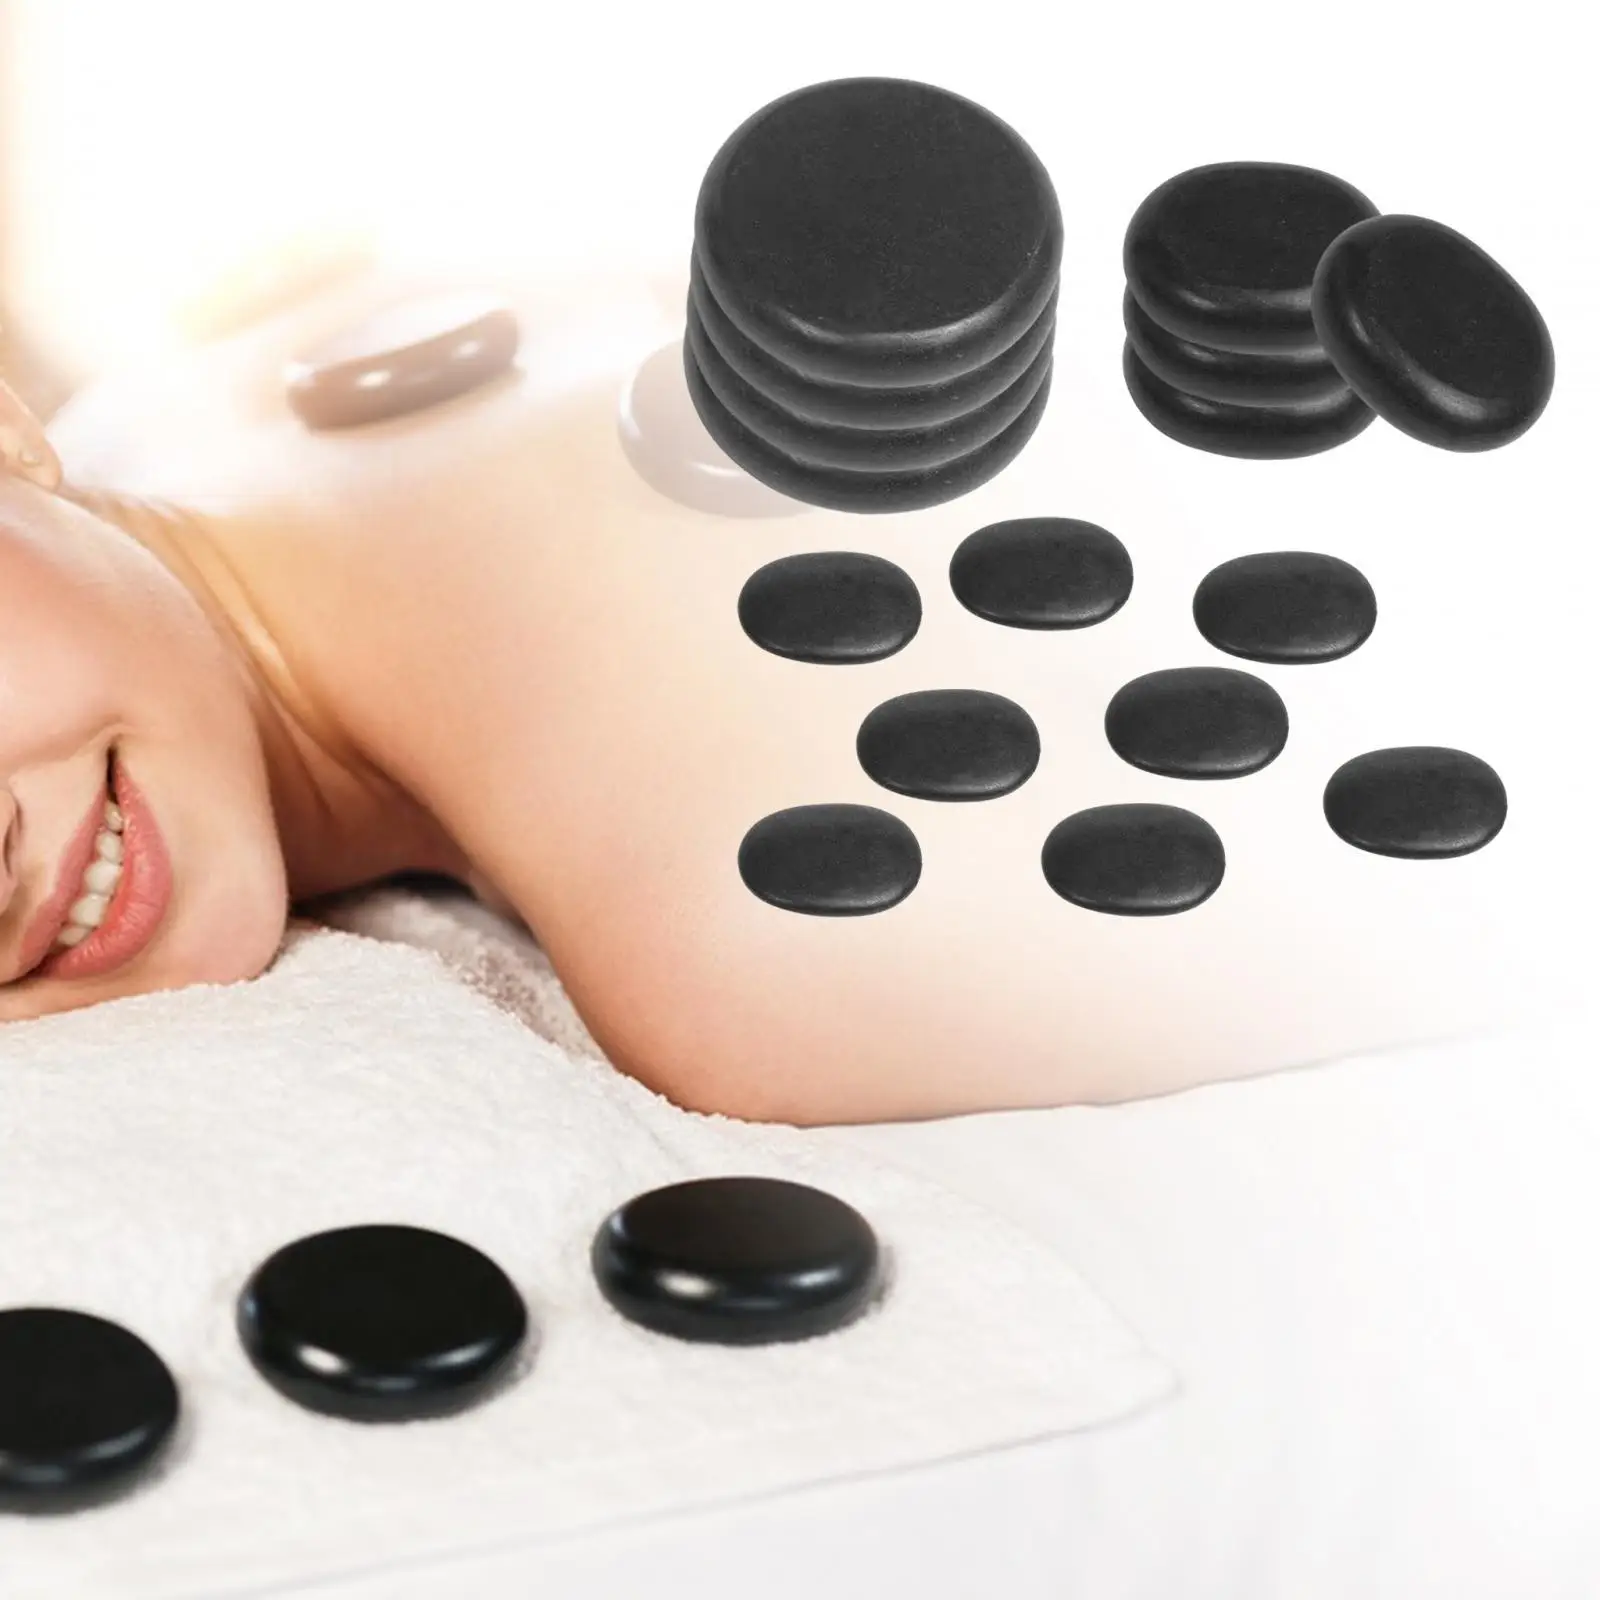 16x Hot Stone Massage Set SPA Stones Beauty Tools Portable Versatile Easy to Clean Multi Sizes Relaxing Heated Warmer Rocks